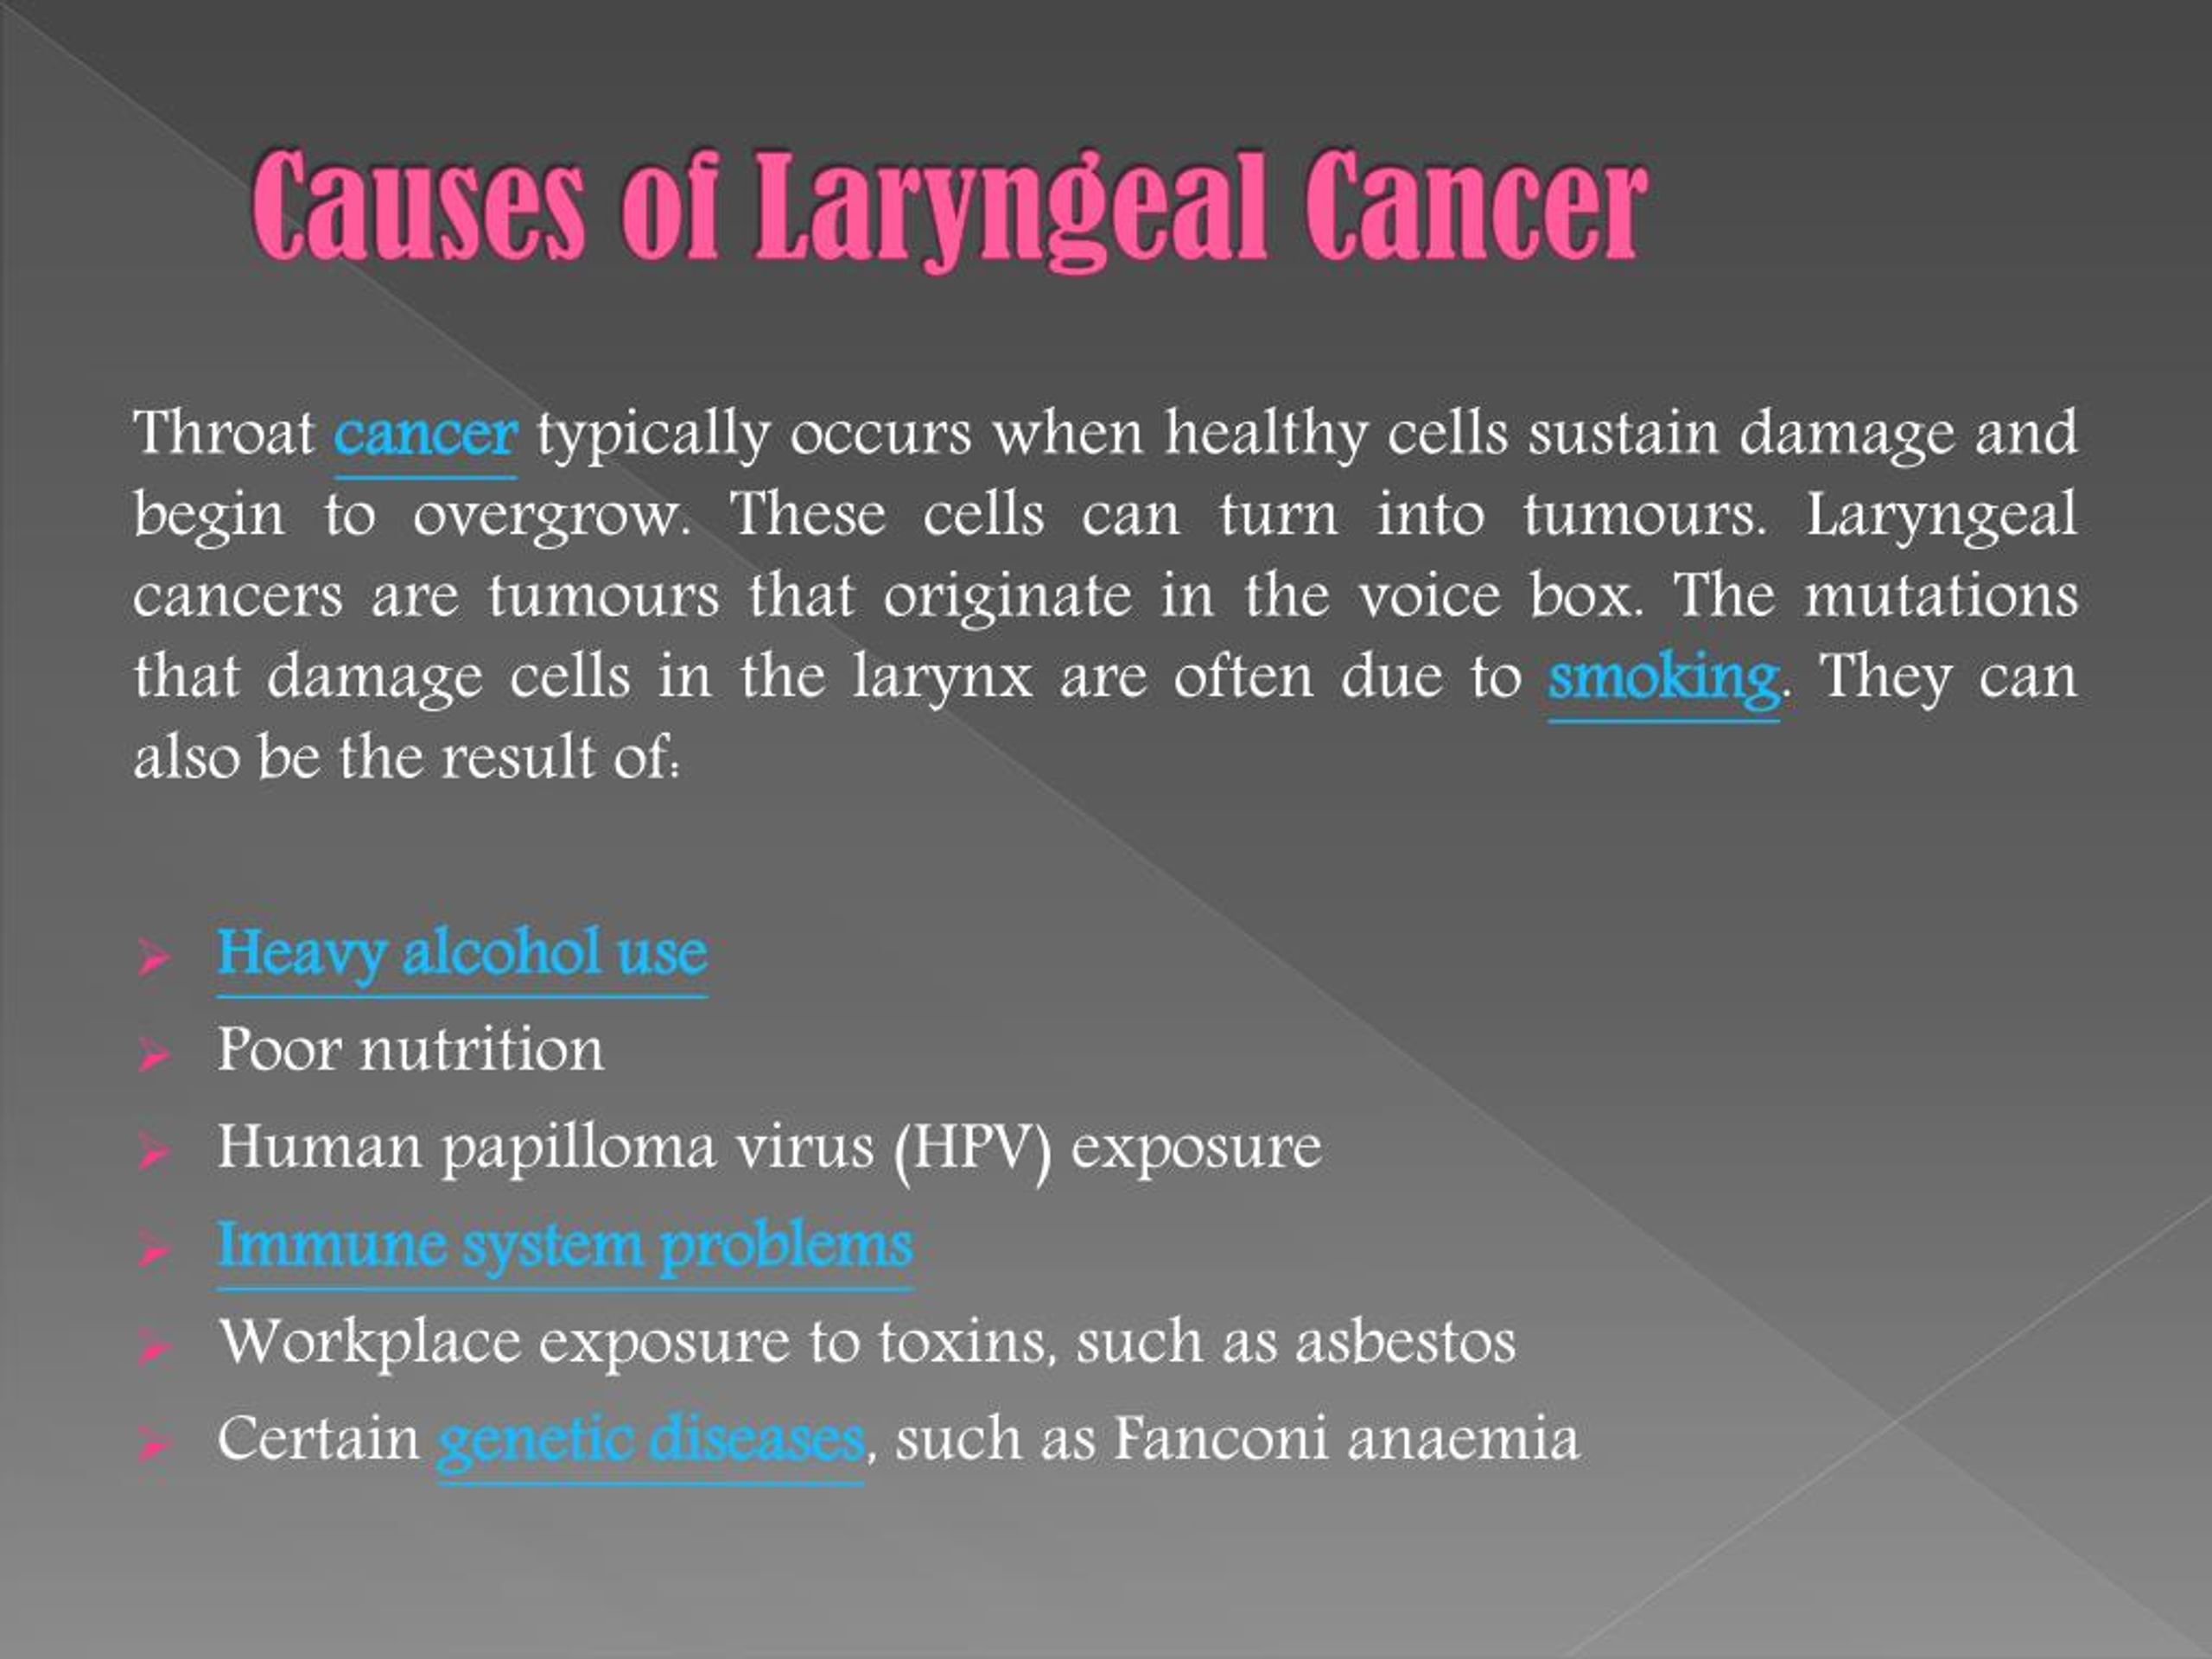 Ppt Laryngeal Cancer Symptoms Causes Diagnosis And Treatment Powerpoint Presentation Id 9387